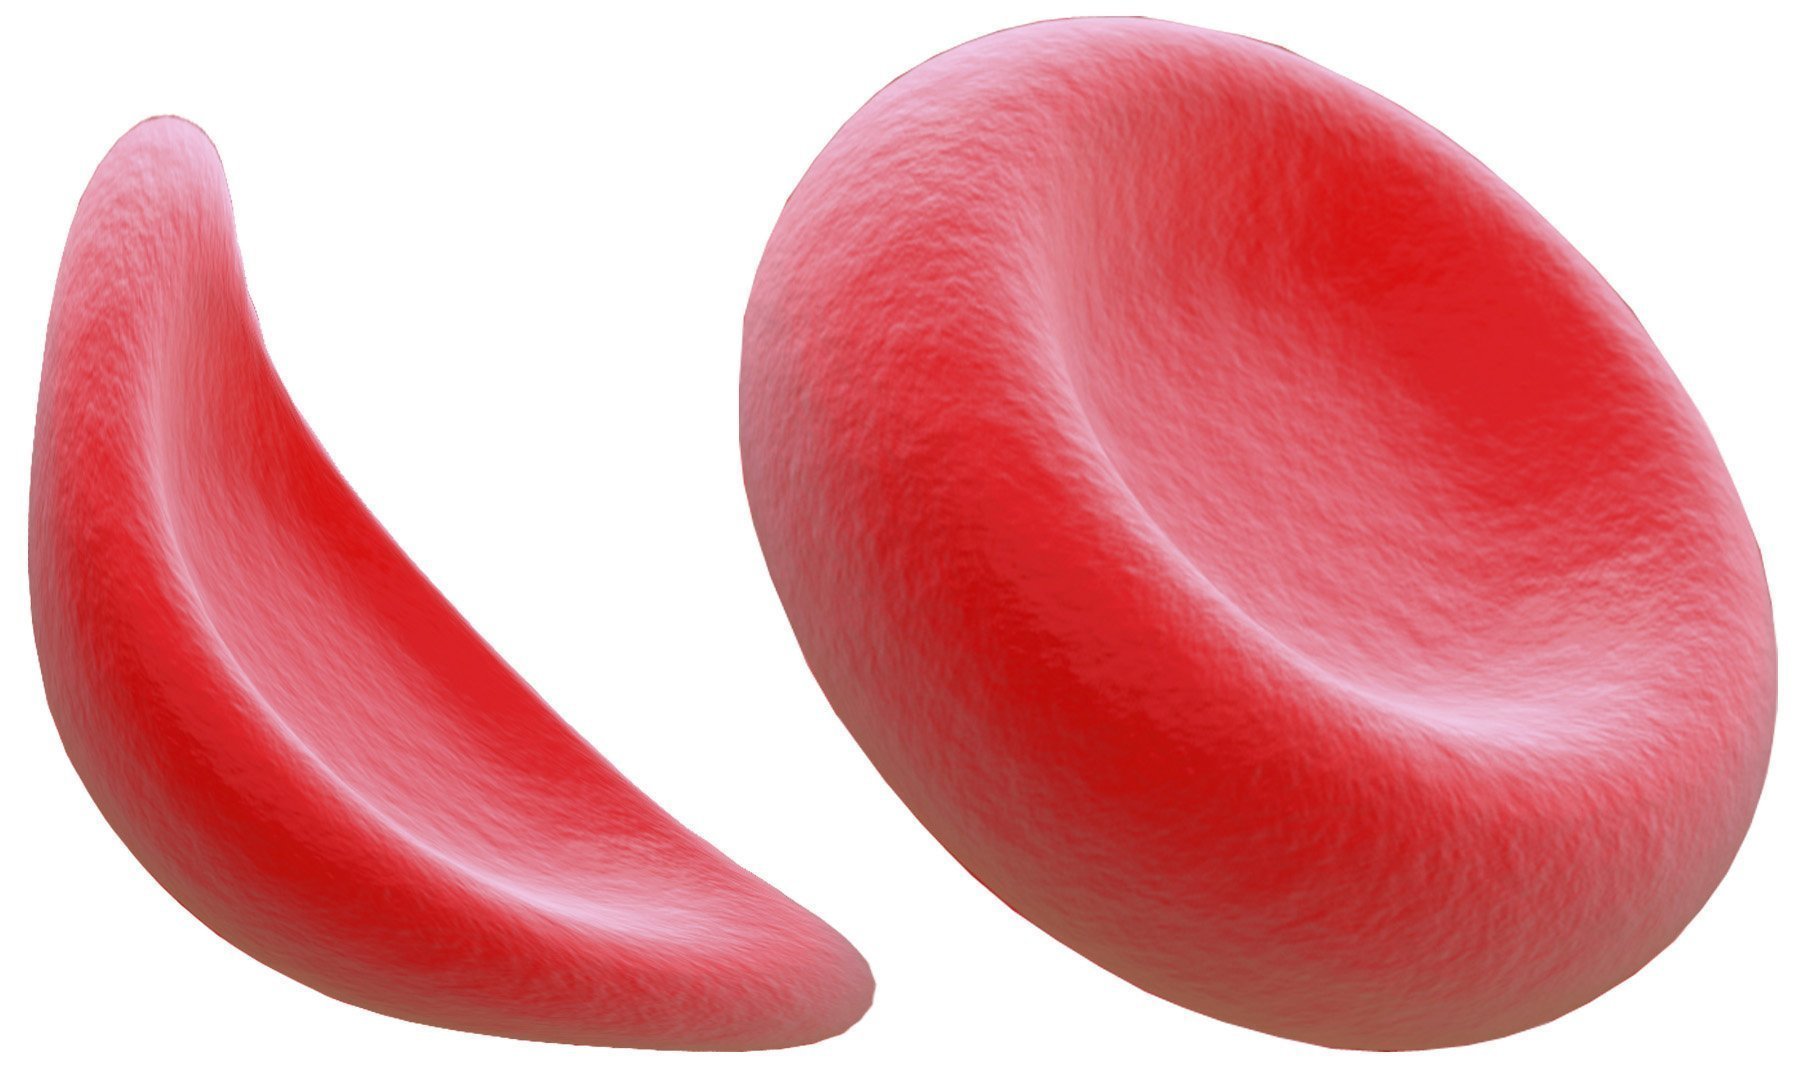 World Sickle Cell Day: FMC Begins free Genotype Screening, tackles sickle cell disease